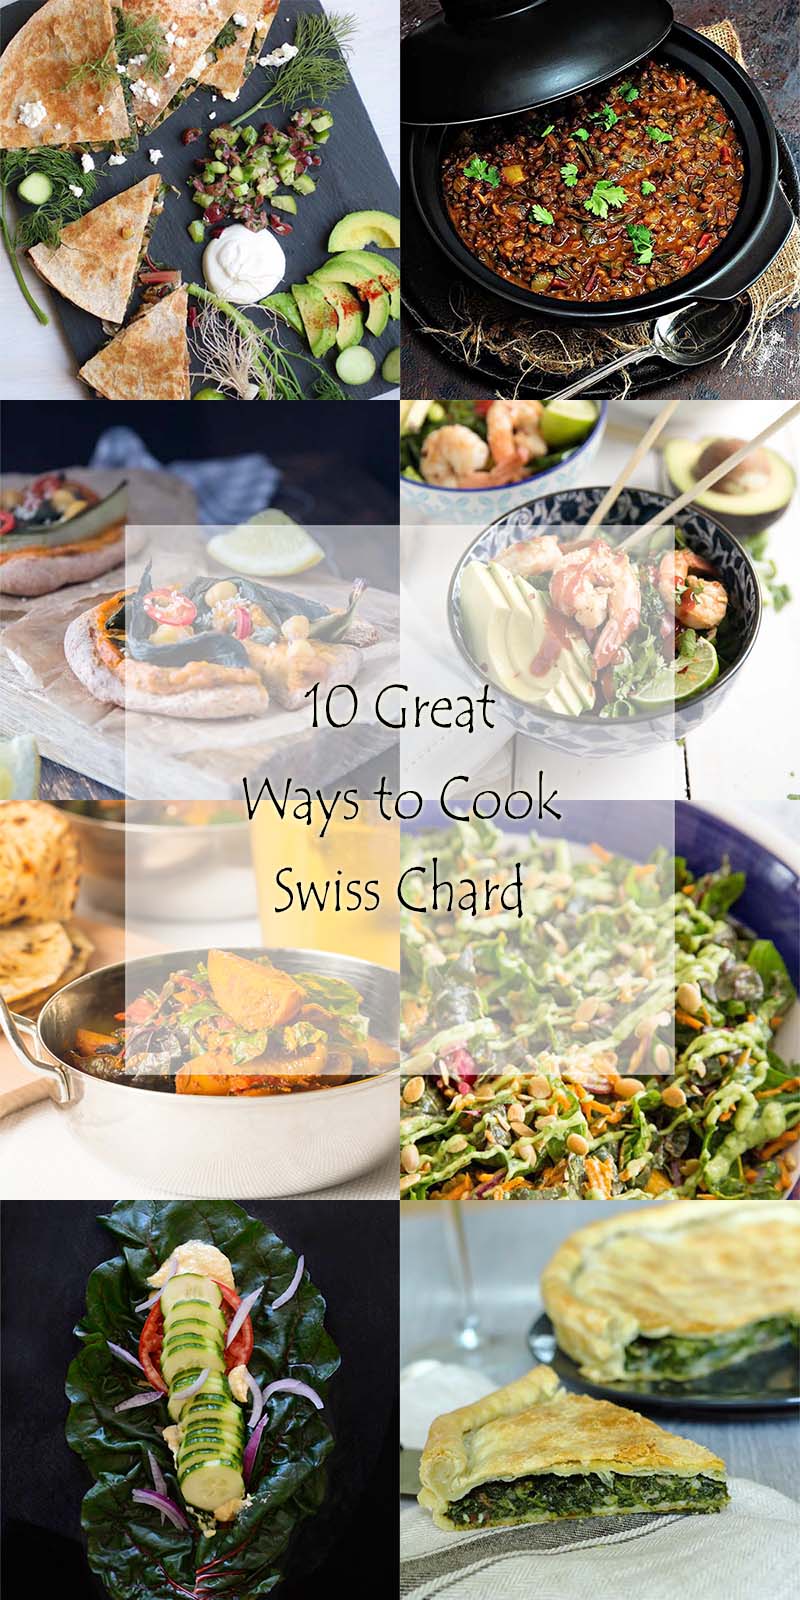 Looking for some new ways to cook Swiss chard? I have here a great roundup of interesting recipes for taking Swiss chard beyond the saute. | justalittlebitofbacon.com